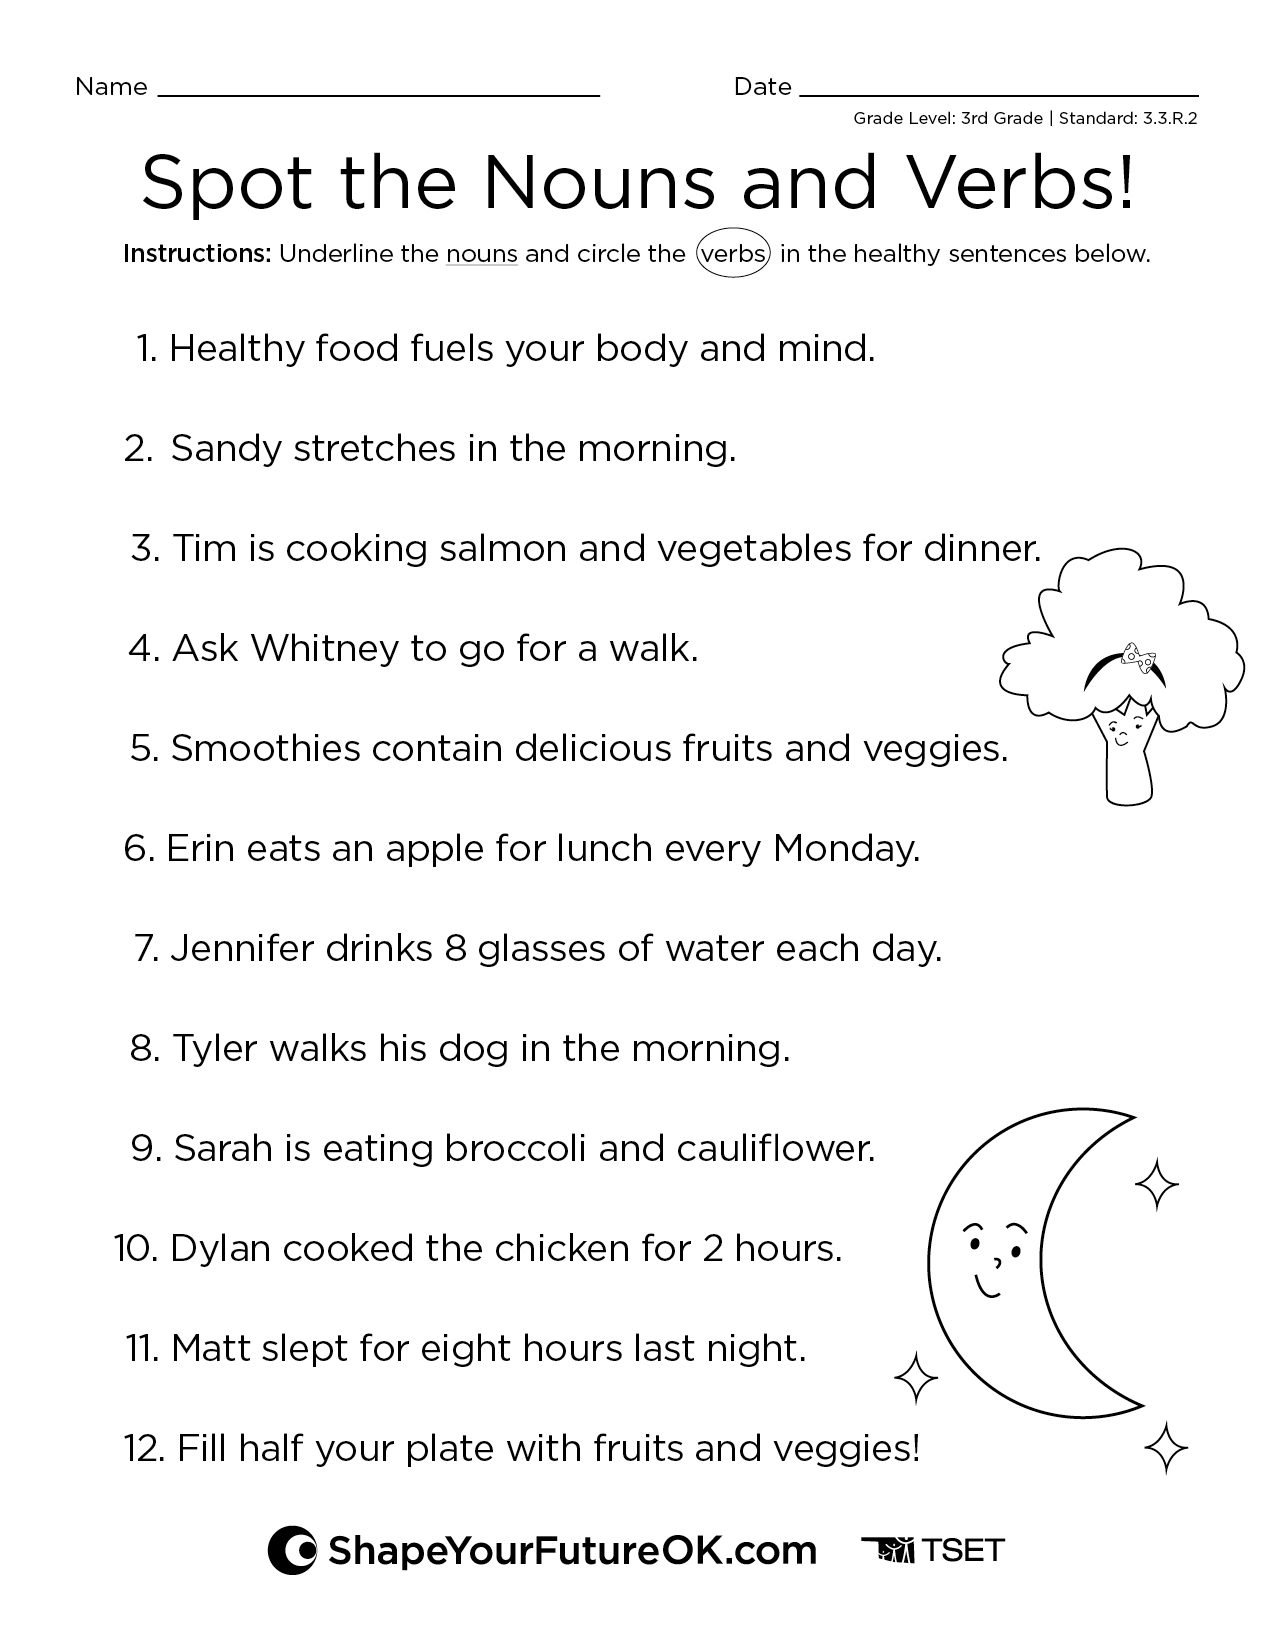 Spot the Nouns and Verbs Download